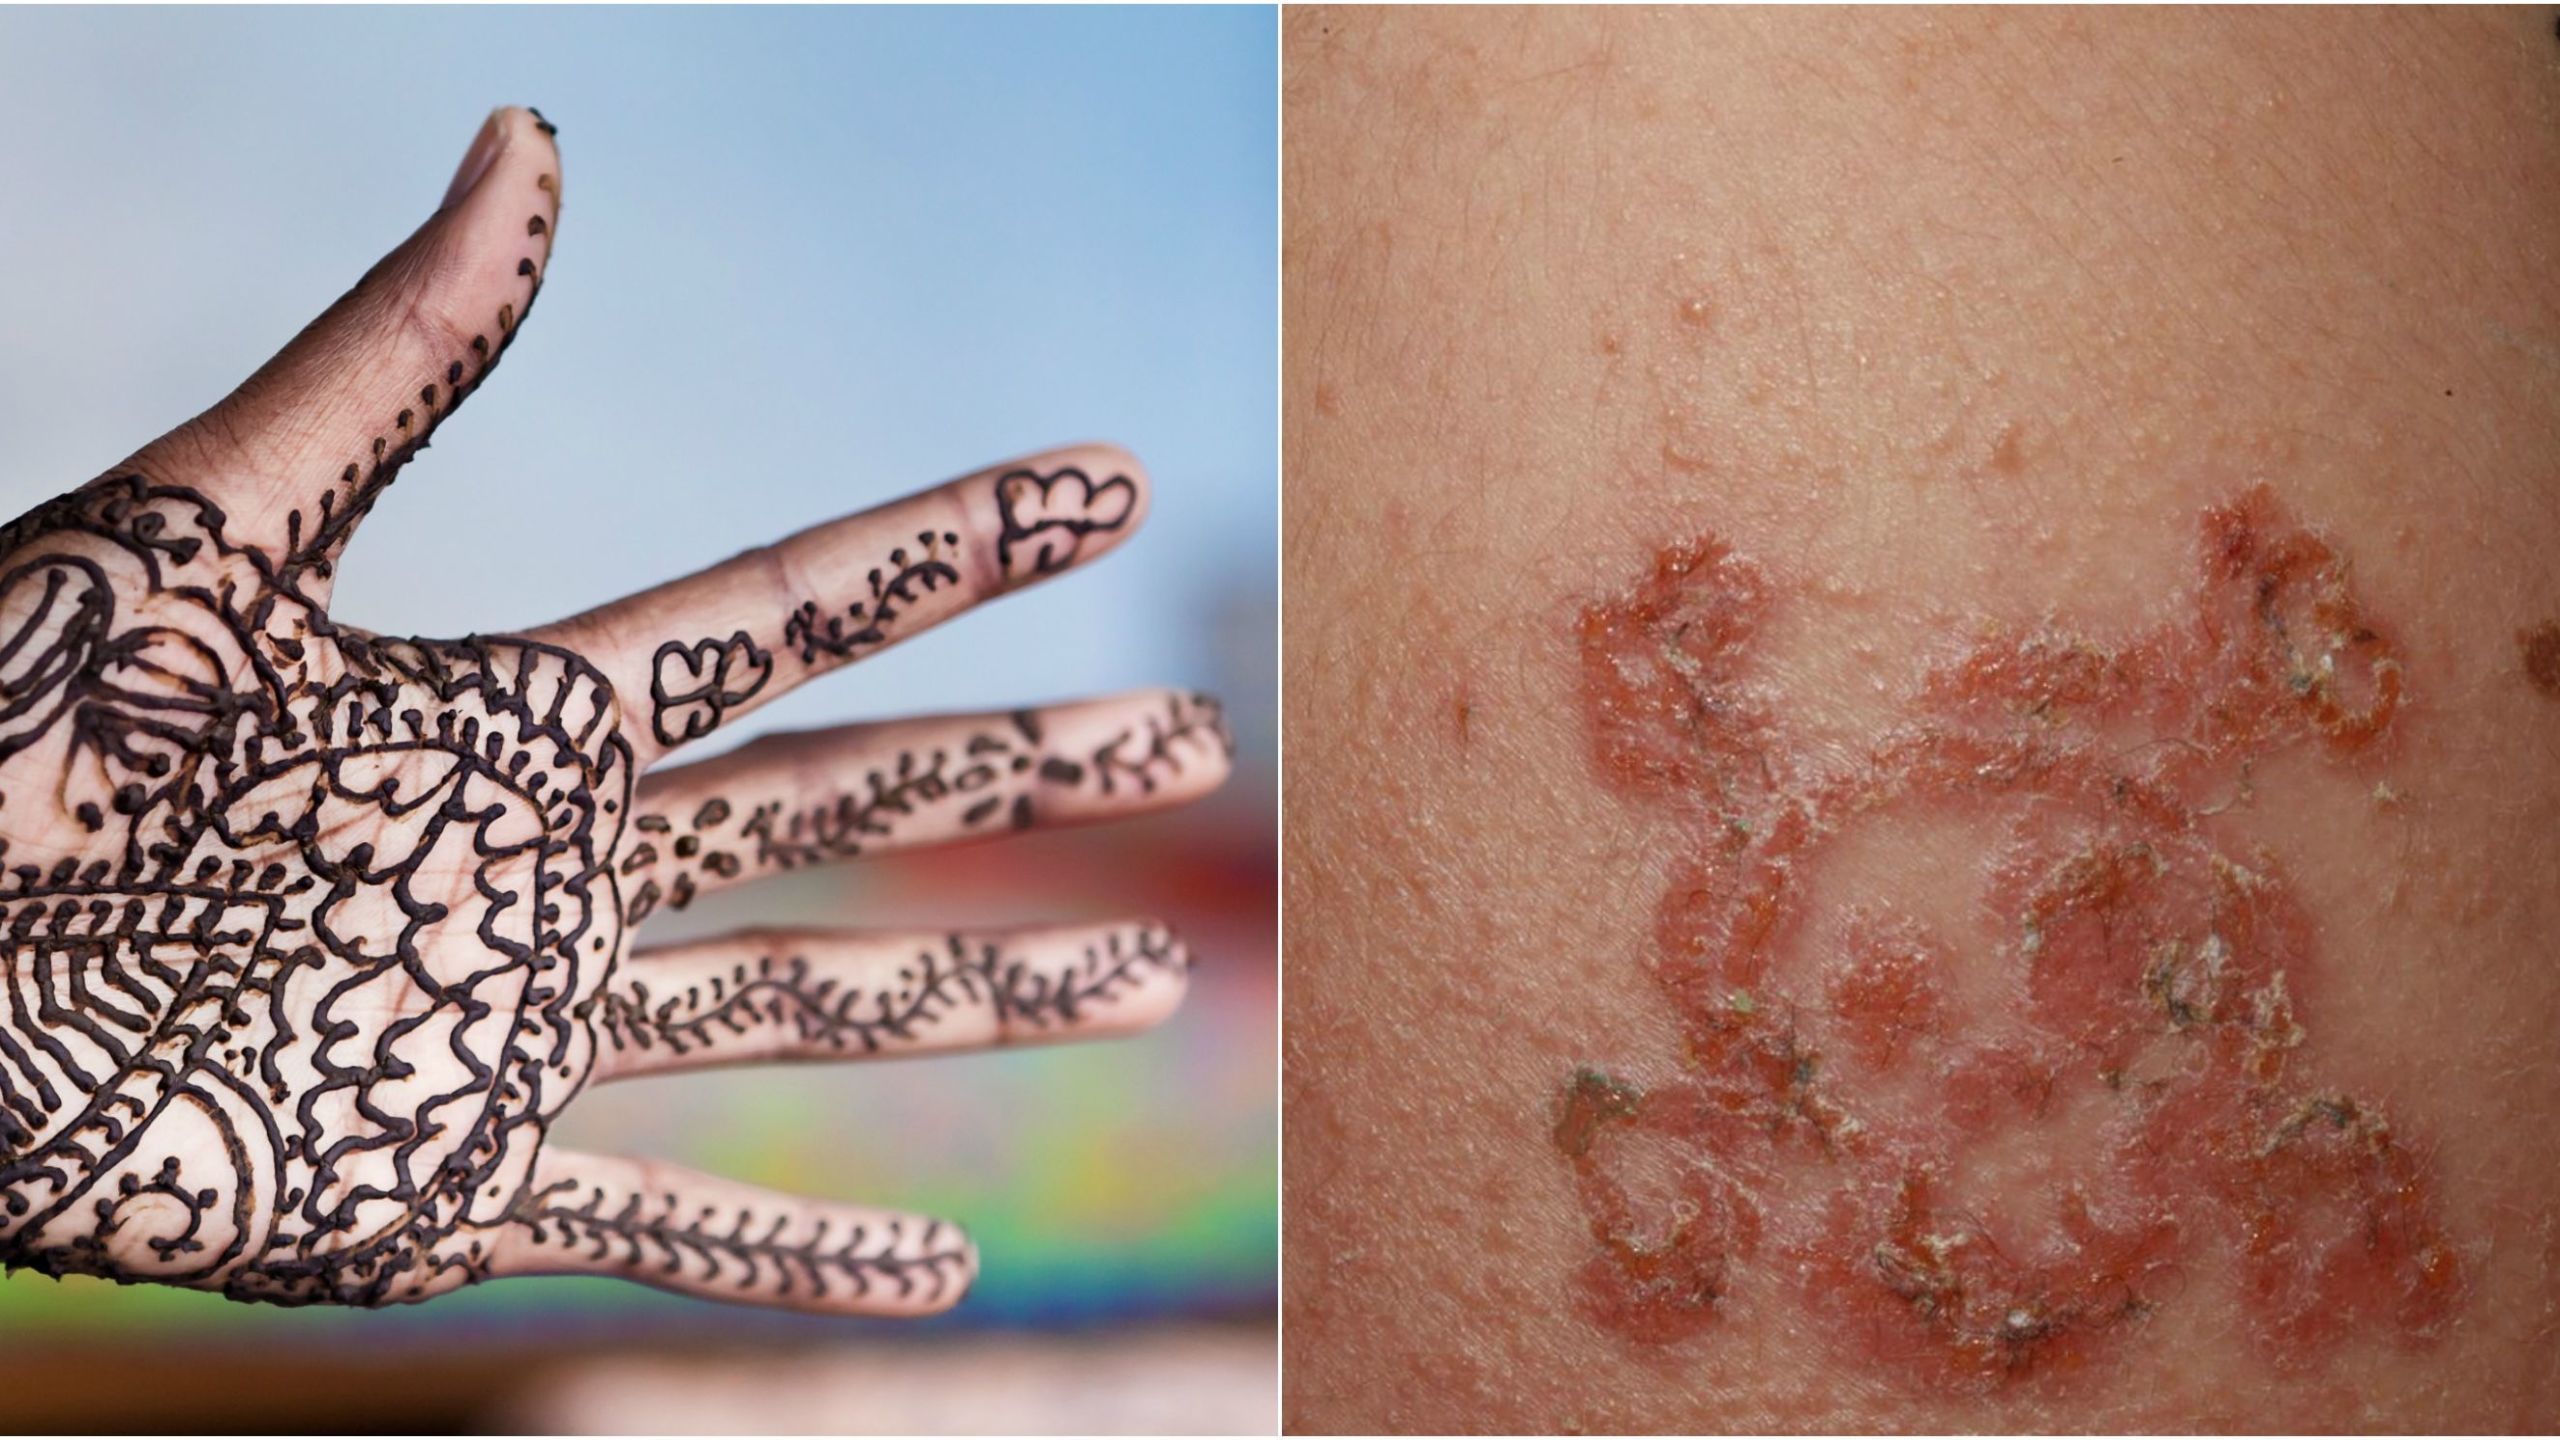 Black Henna Tattoos Can Cause Severe Skin Reactions, Case Shows | Live  Science